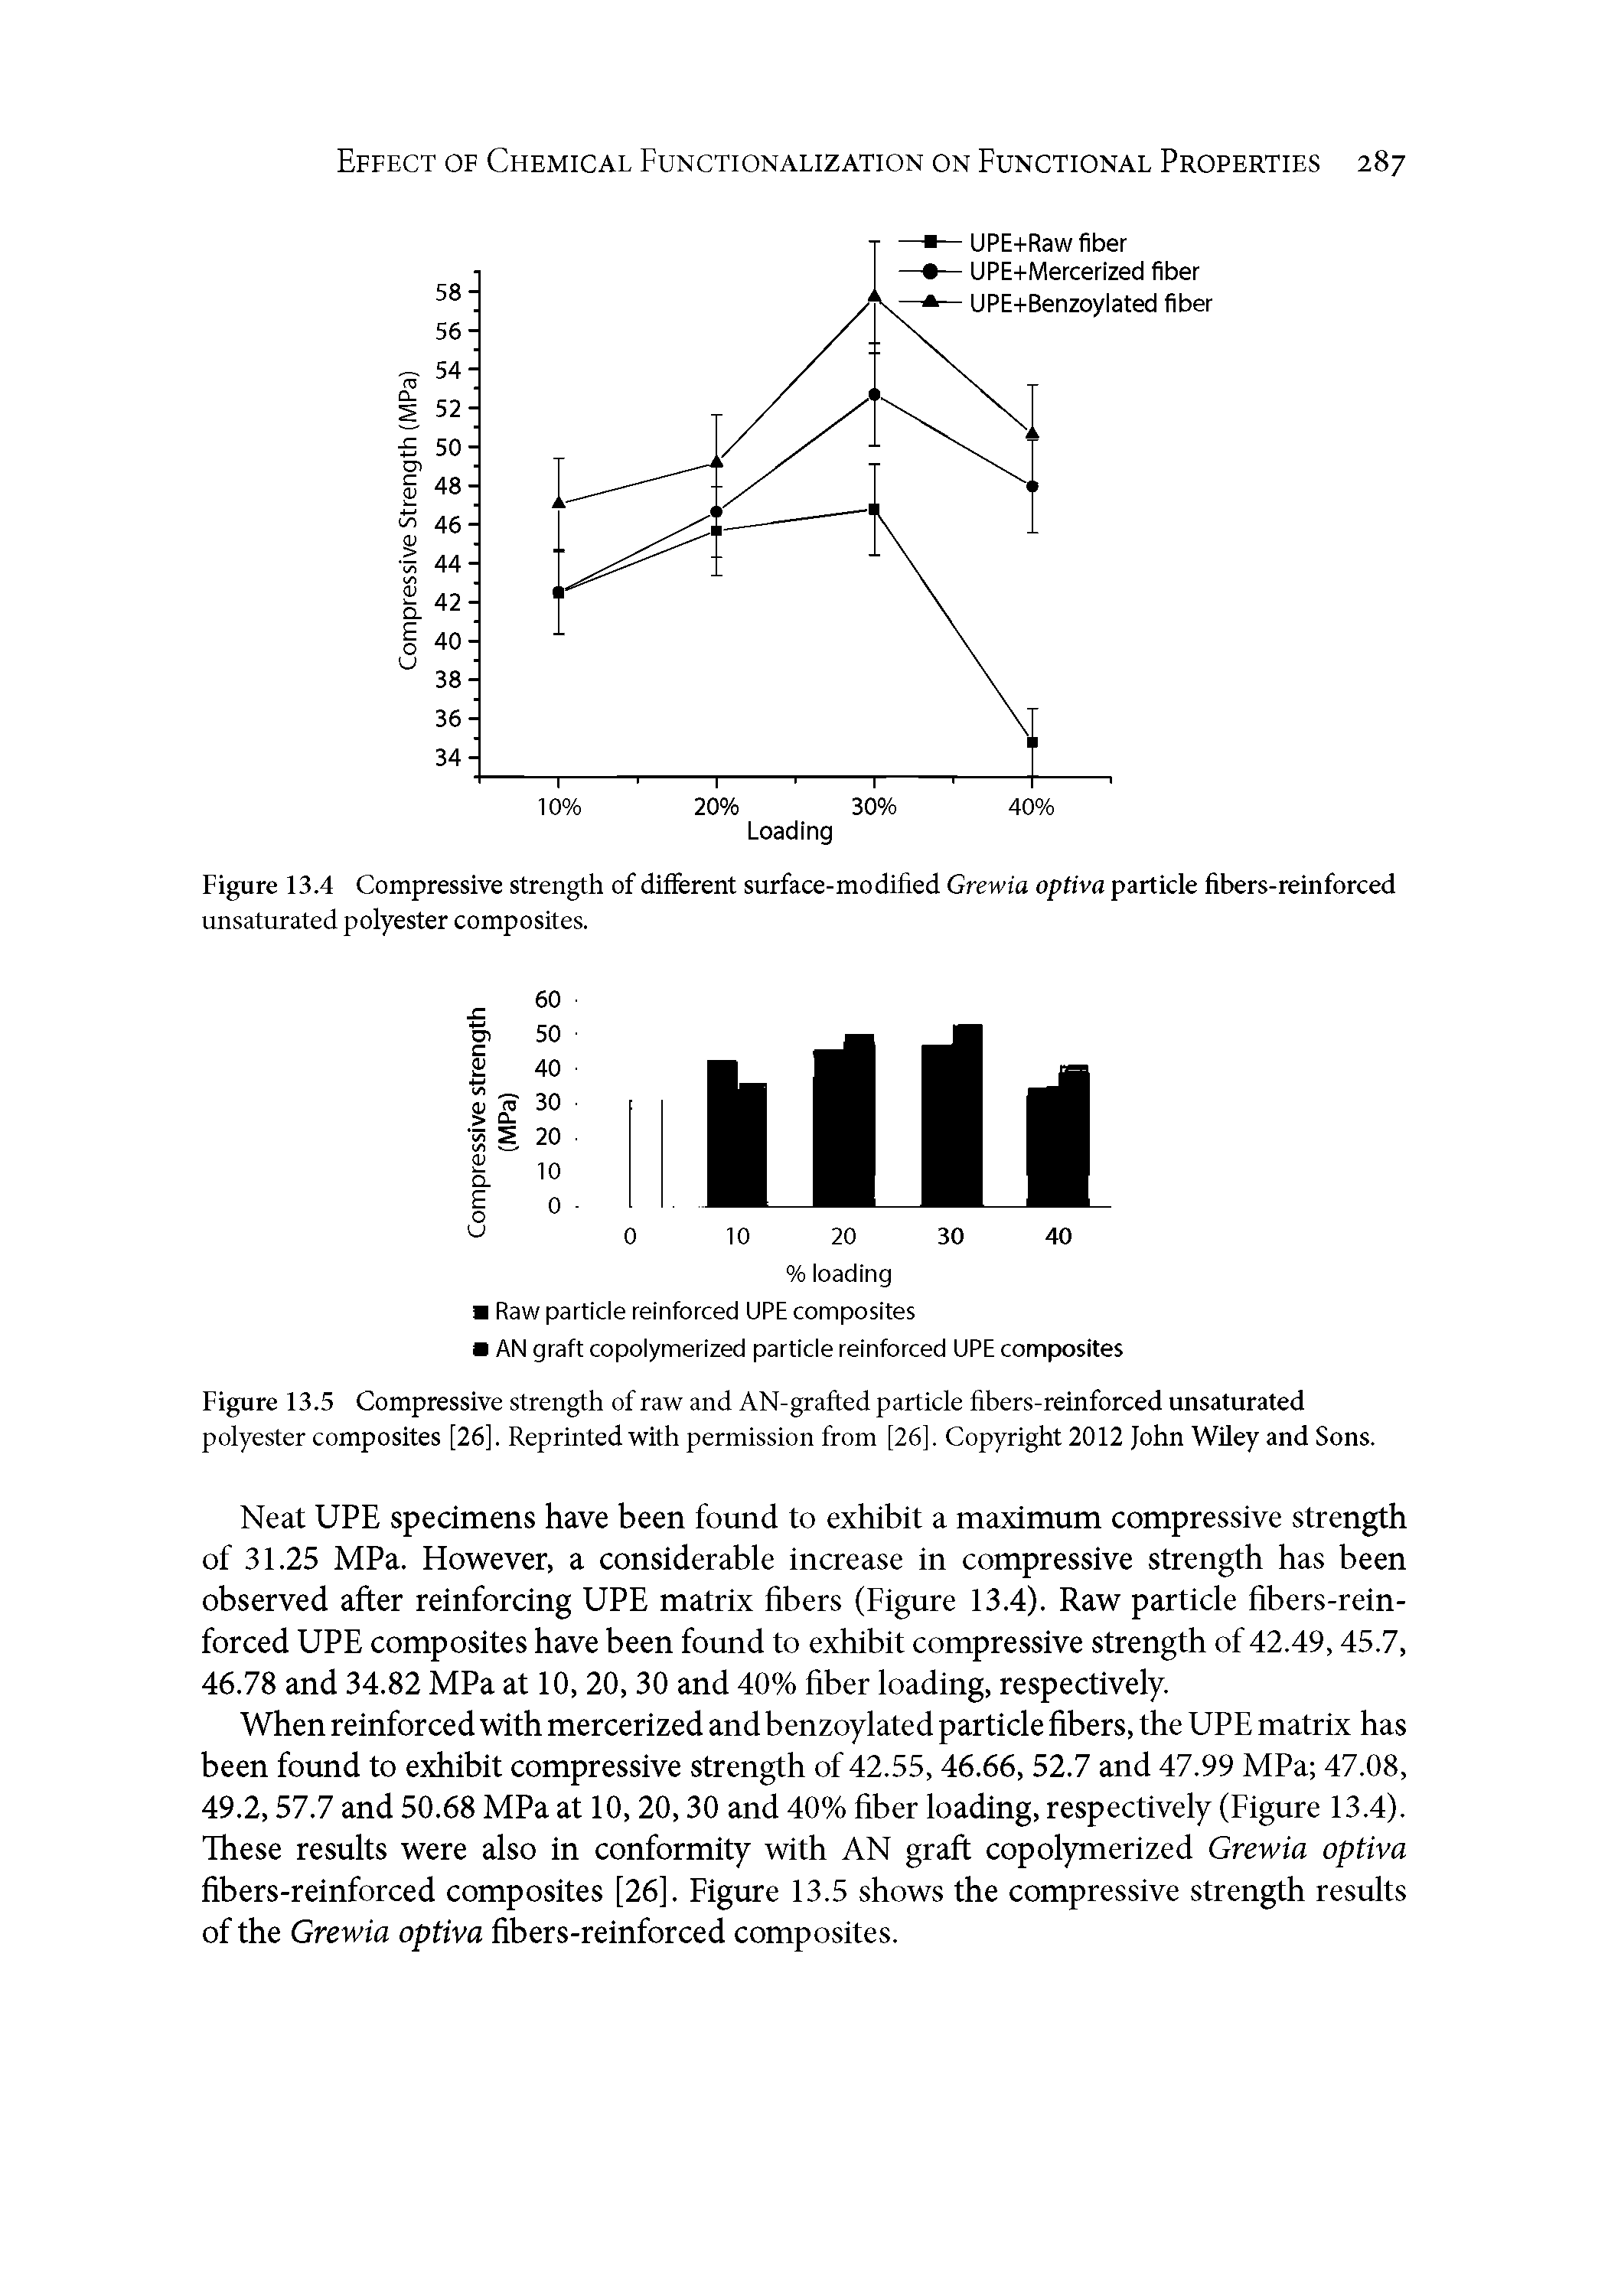 Figure 13.5 Compressive strength of raw and AN-grafted particle fibers-reinforced unsaturated polyester composites [26]. Reprinted with permission from [26]. Copyright 2012 John WUey and Sons.